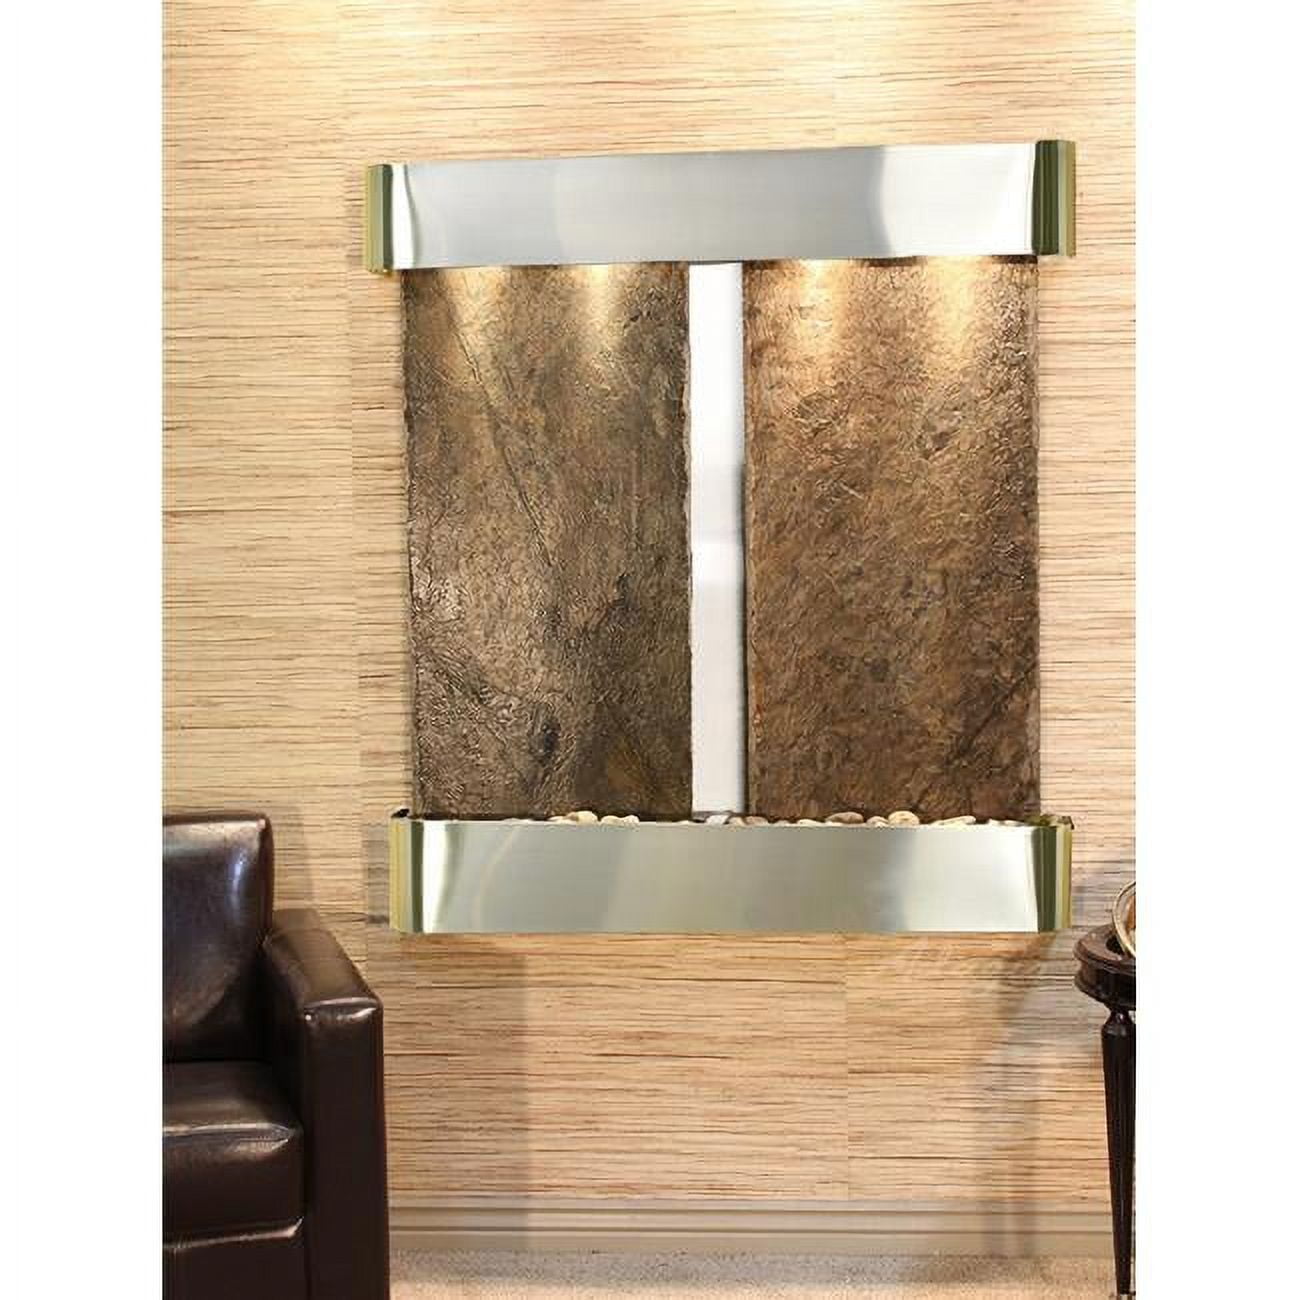 Picture of Adagio AFR2002 Aspen Falls Round Wall Fountain - Stainless Steel-Green Natural Slate